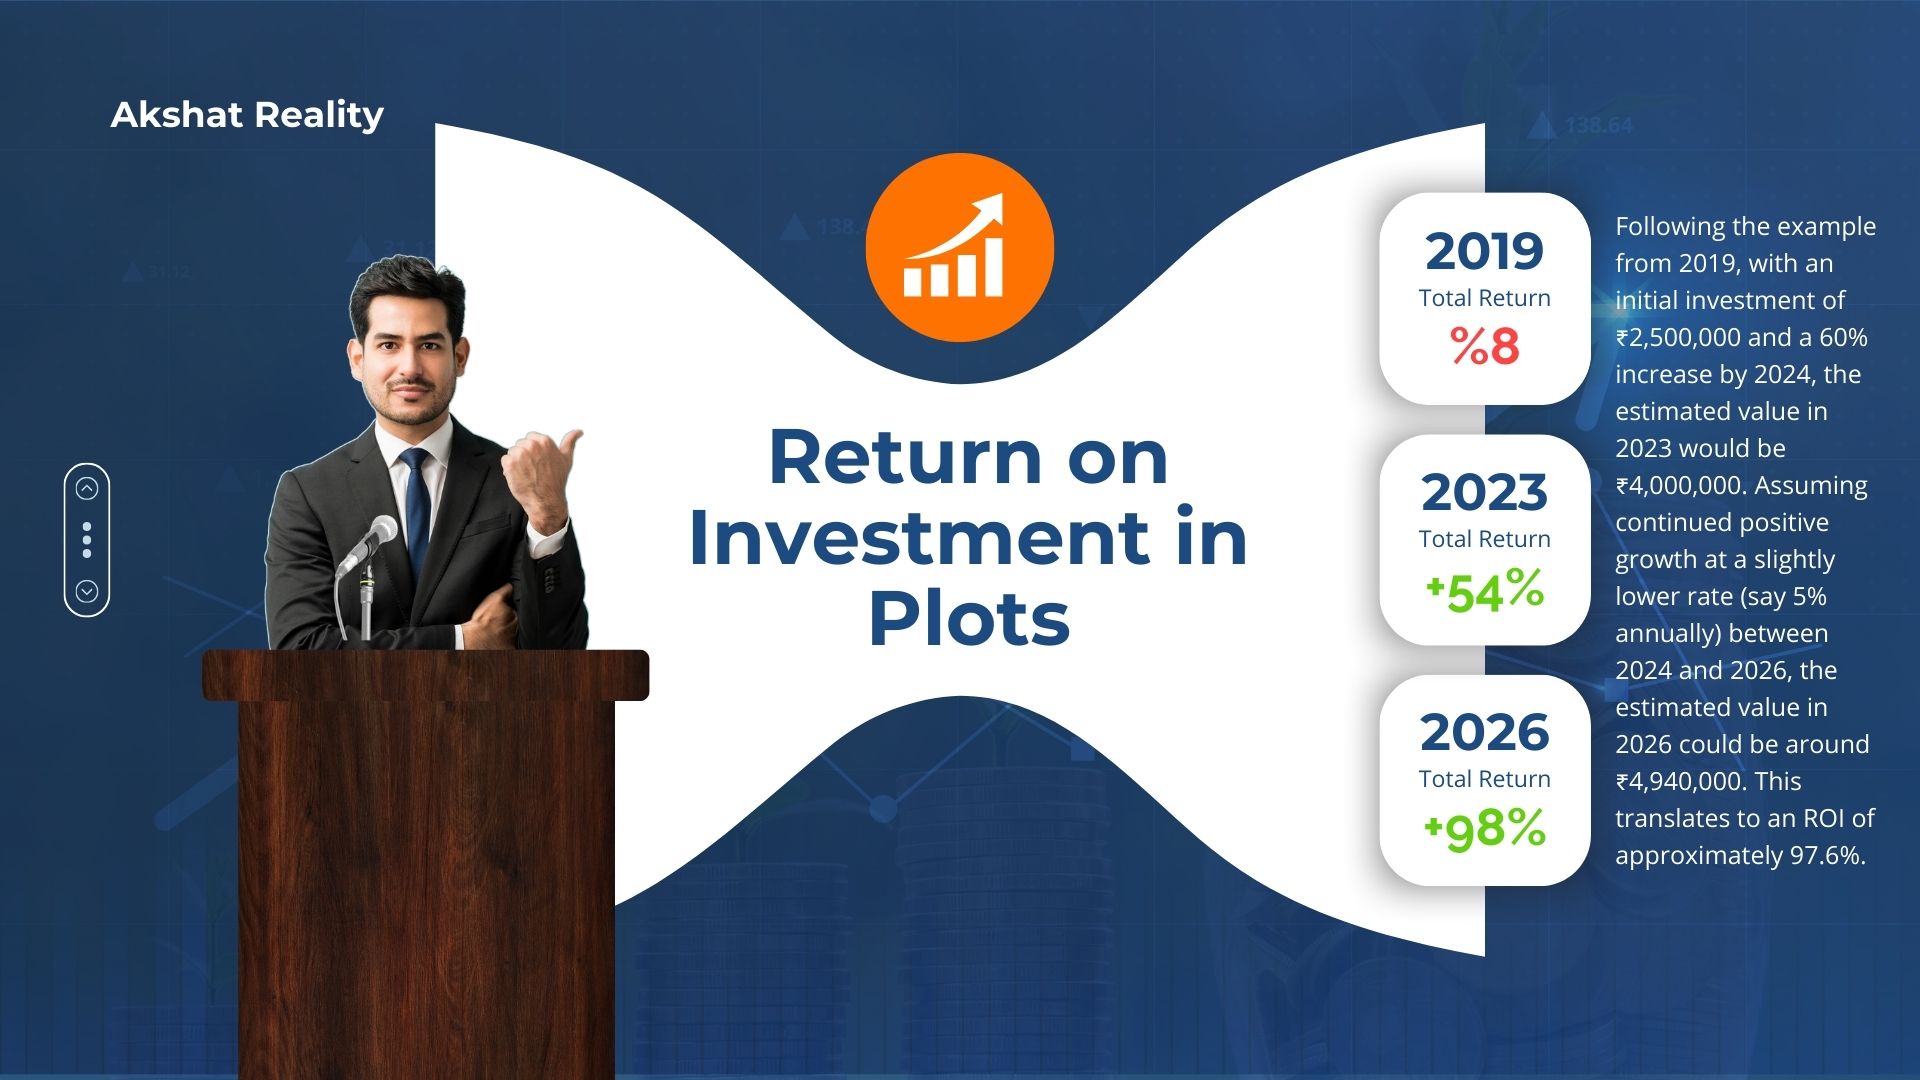 The image showcases a deep blue background, conveying a sense of stability and trust. In the foreground, bold text reads "Return on Investment in Plot" alongside a growth percentage chart likely illustrating a comparison between 2019, 2023 and 2026.